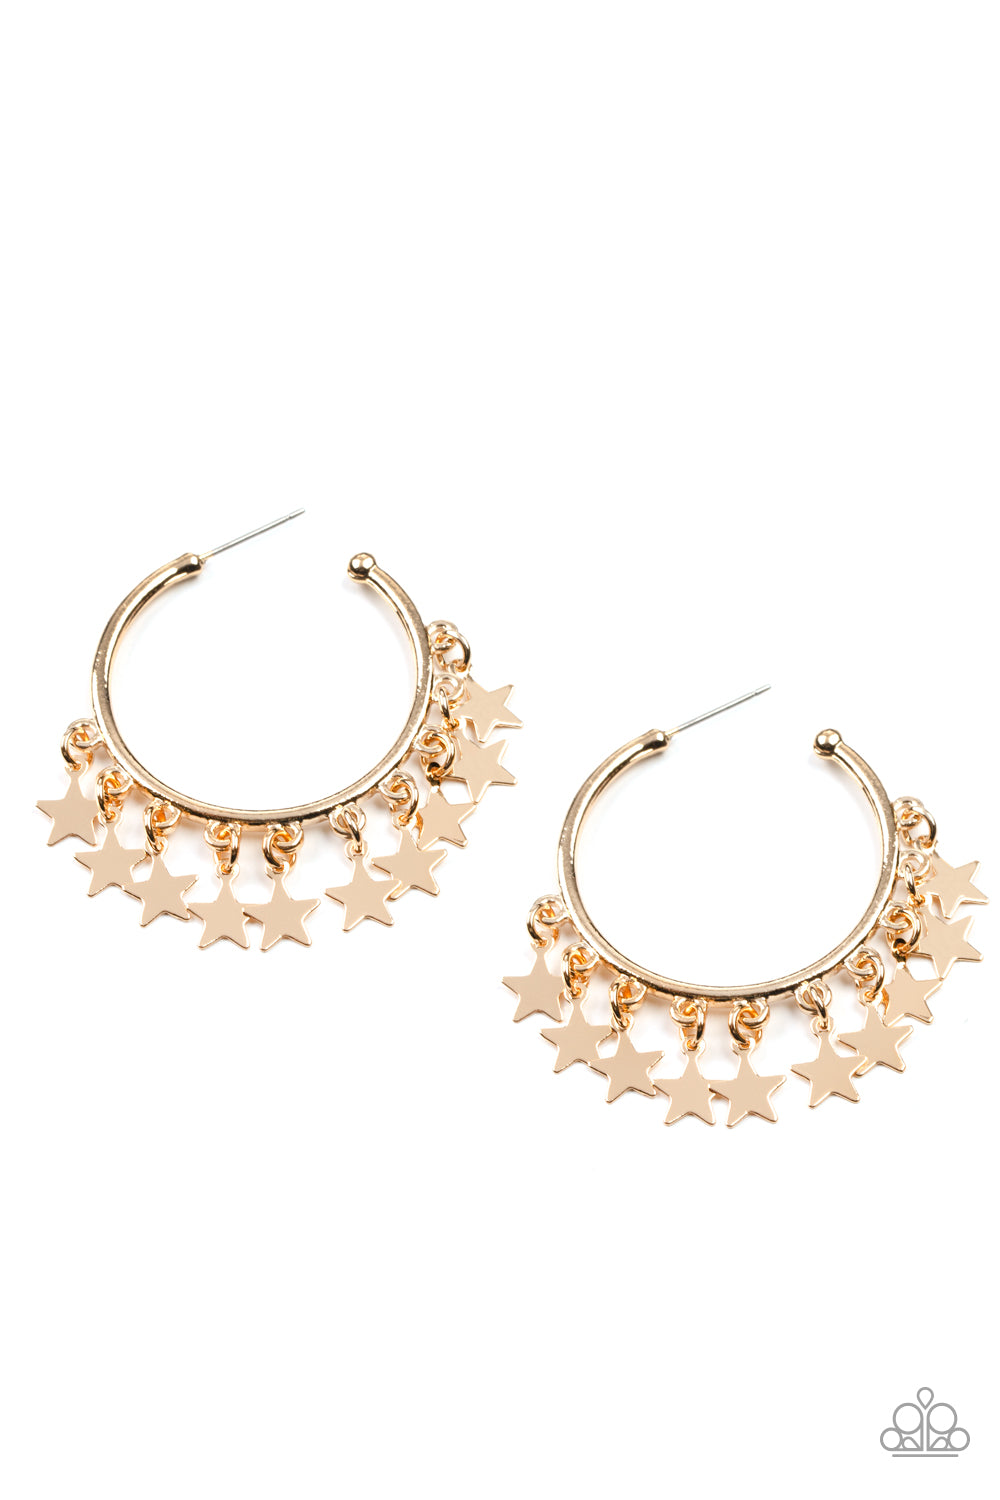 Happy Independence Day Gold Hoop Earring - Paparazzi Accessories  A shiny collection of gold star charms trickles from the bottom of a classic gold hoop, creating a stellar fringe. Earring attaches to a standard post fitting. Hoop measures approximately 1 1/4" in diameter.  Sold as one pair of hoop earrings.